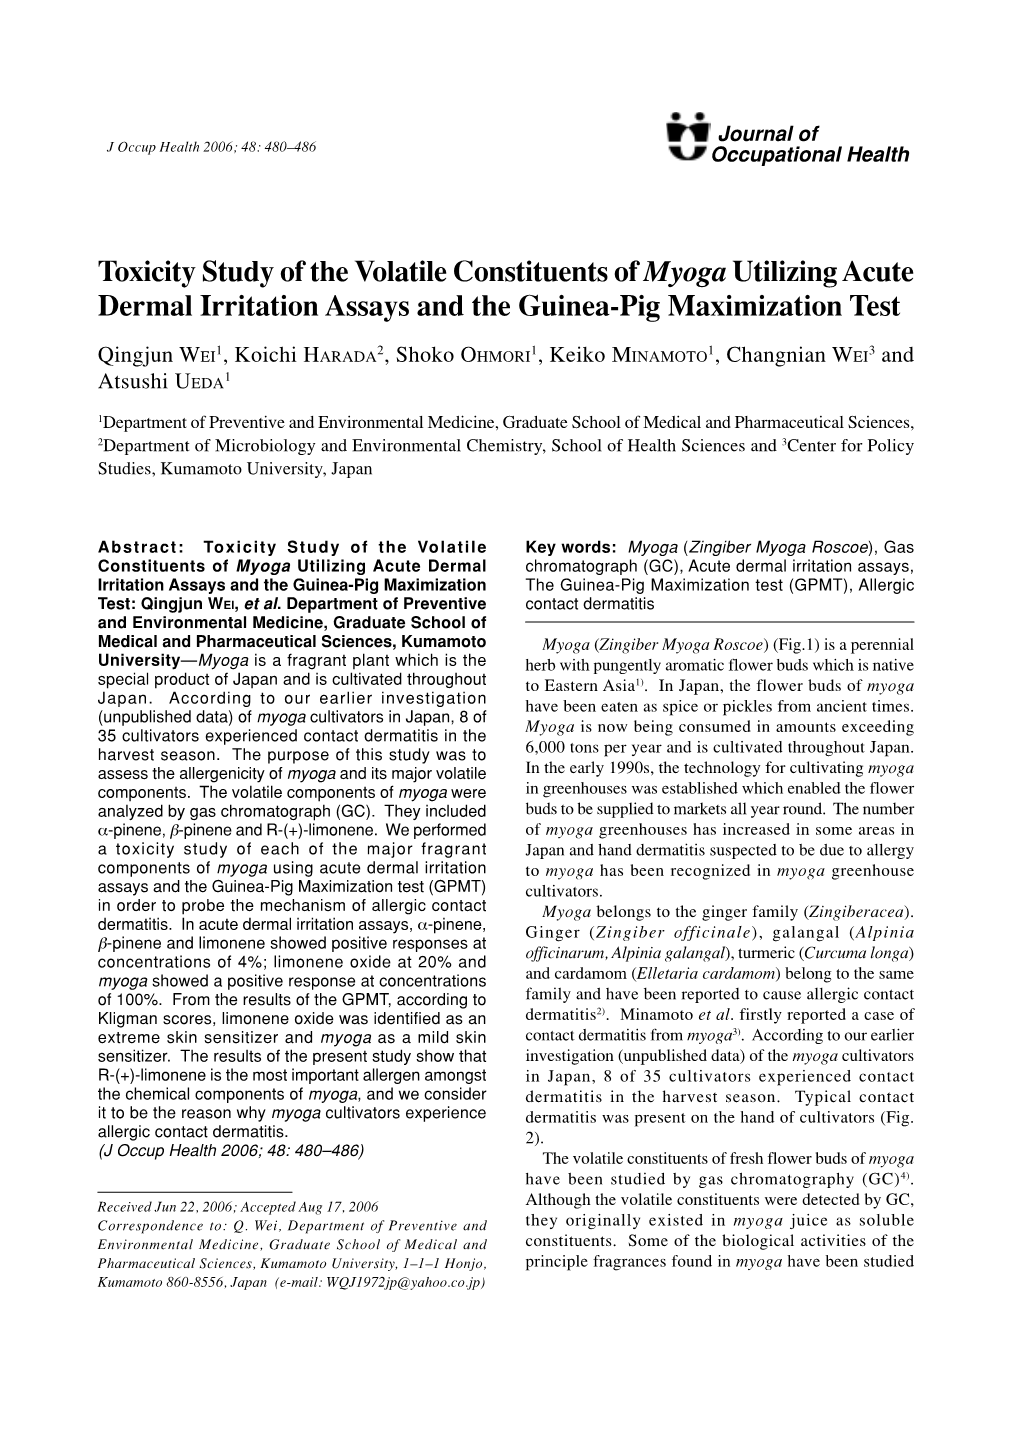 Toxicity Study of the Volatile Constituents of Myoga Utilizing Acute Dermal Irritation Assays and the Guinea-Pig Maximization Test